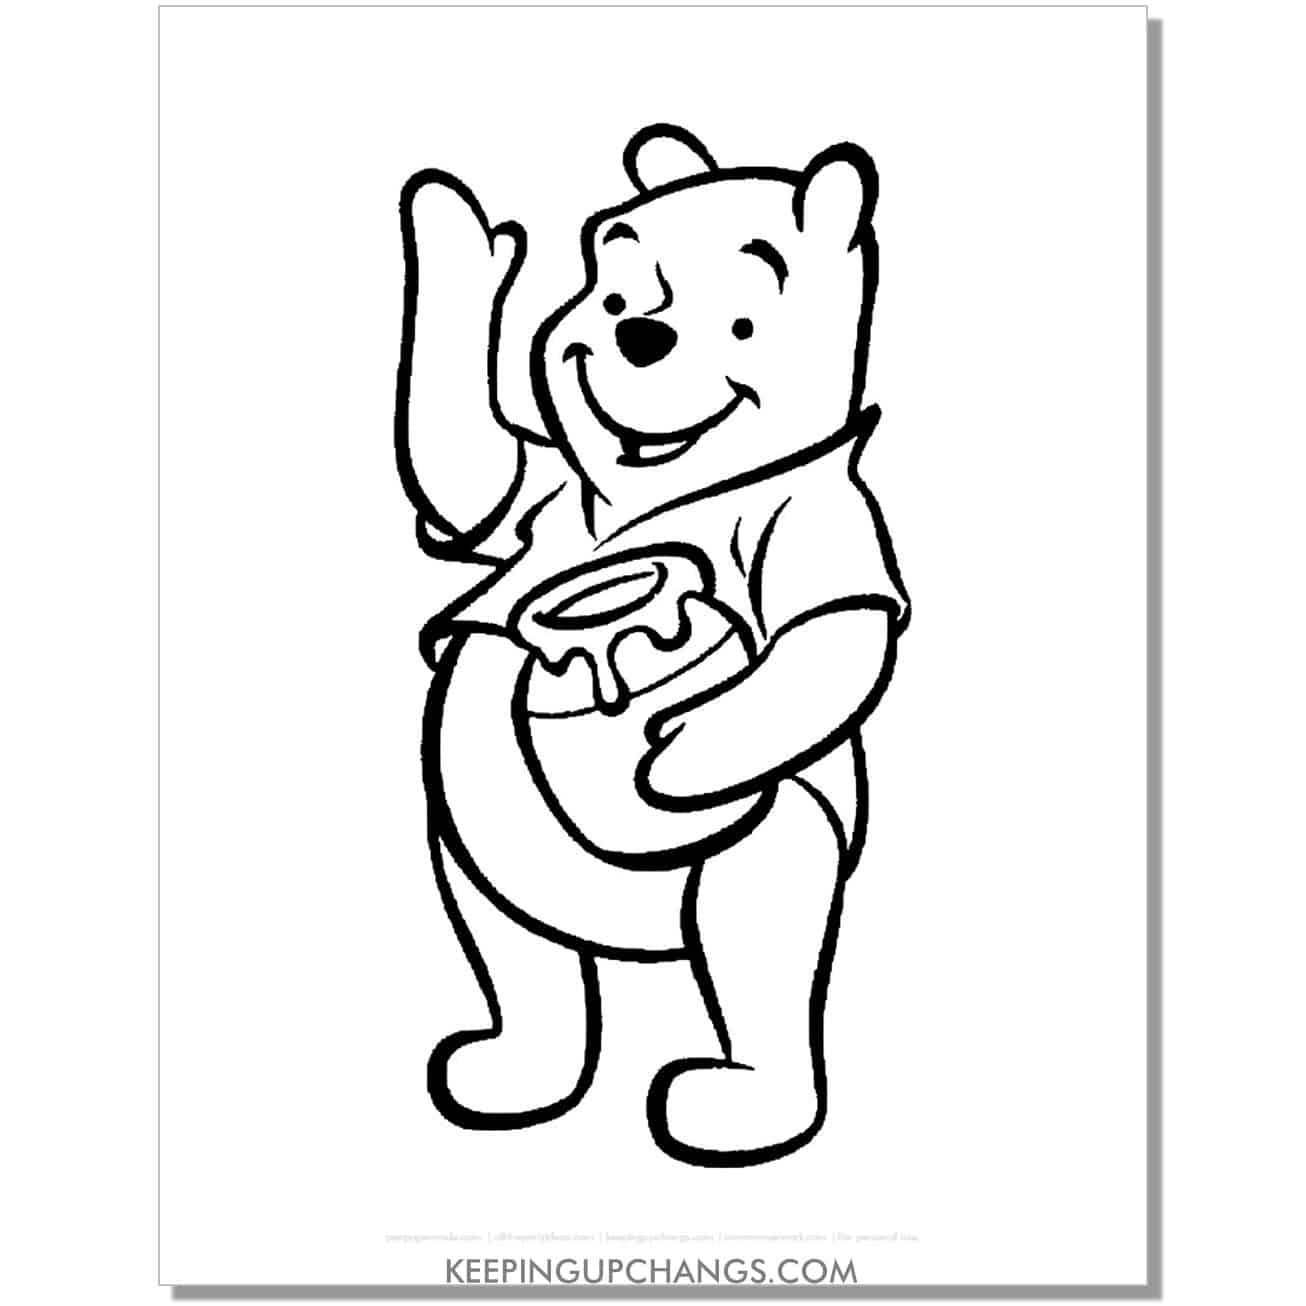 winnie the pooh waving with honey pot in hand coloring page, sheet.